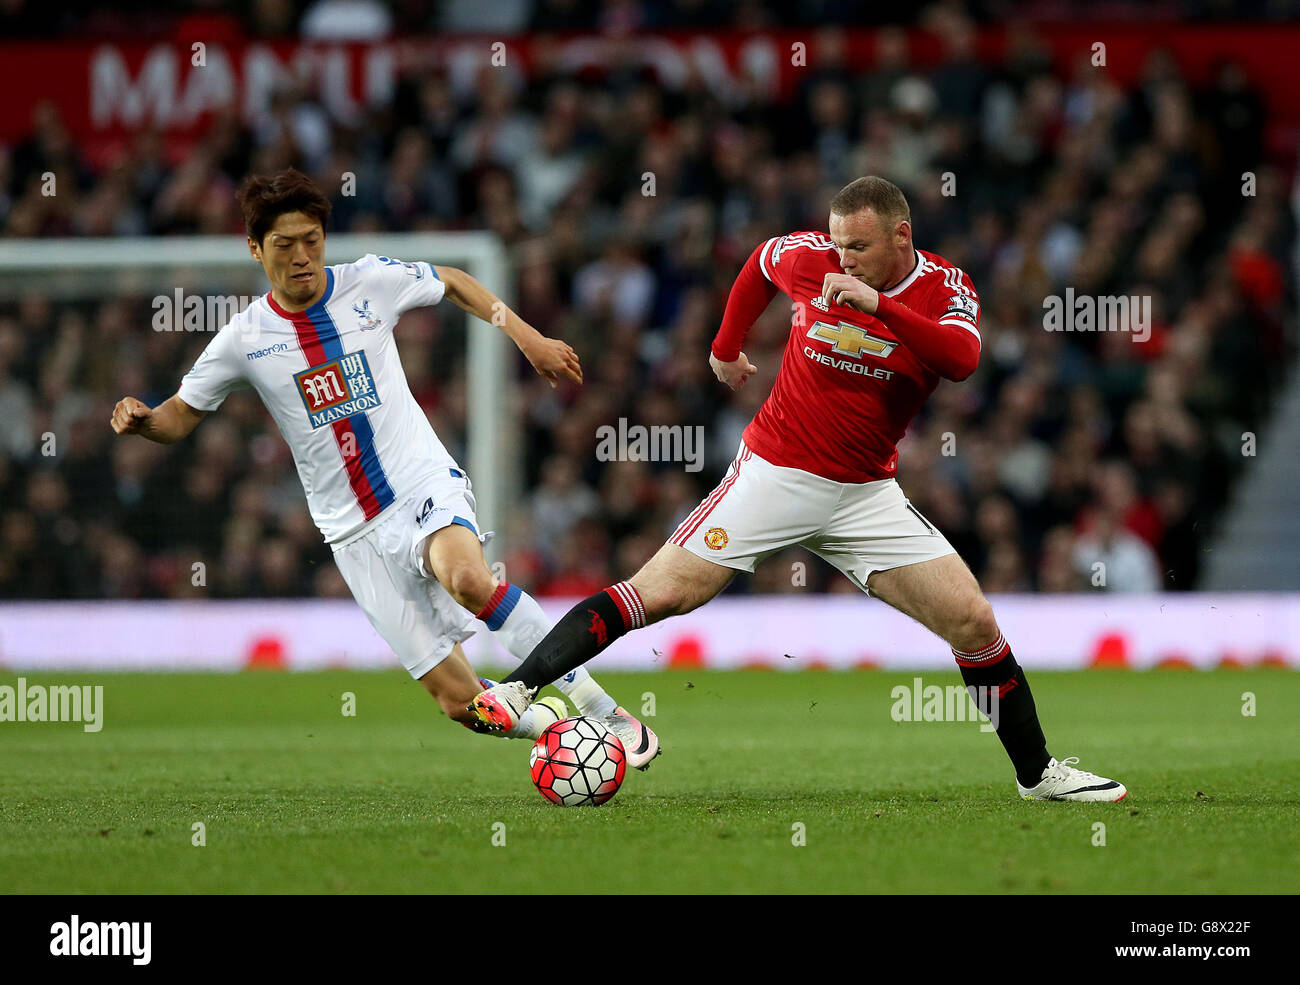 Crystal Palace's Lee Chung-yong and Manchester United's Wayne Rooney battle for the ball during the Barclays Premier League match at Old Trafford, Manchester. Stock Photo